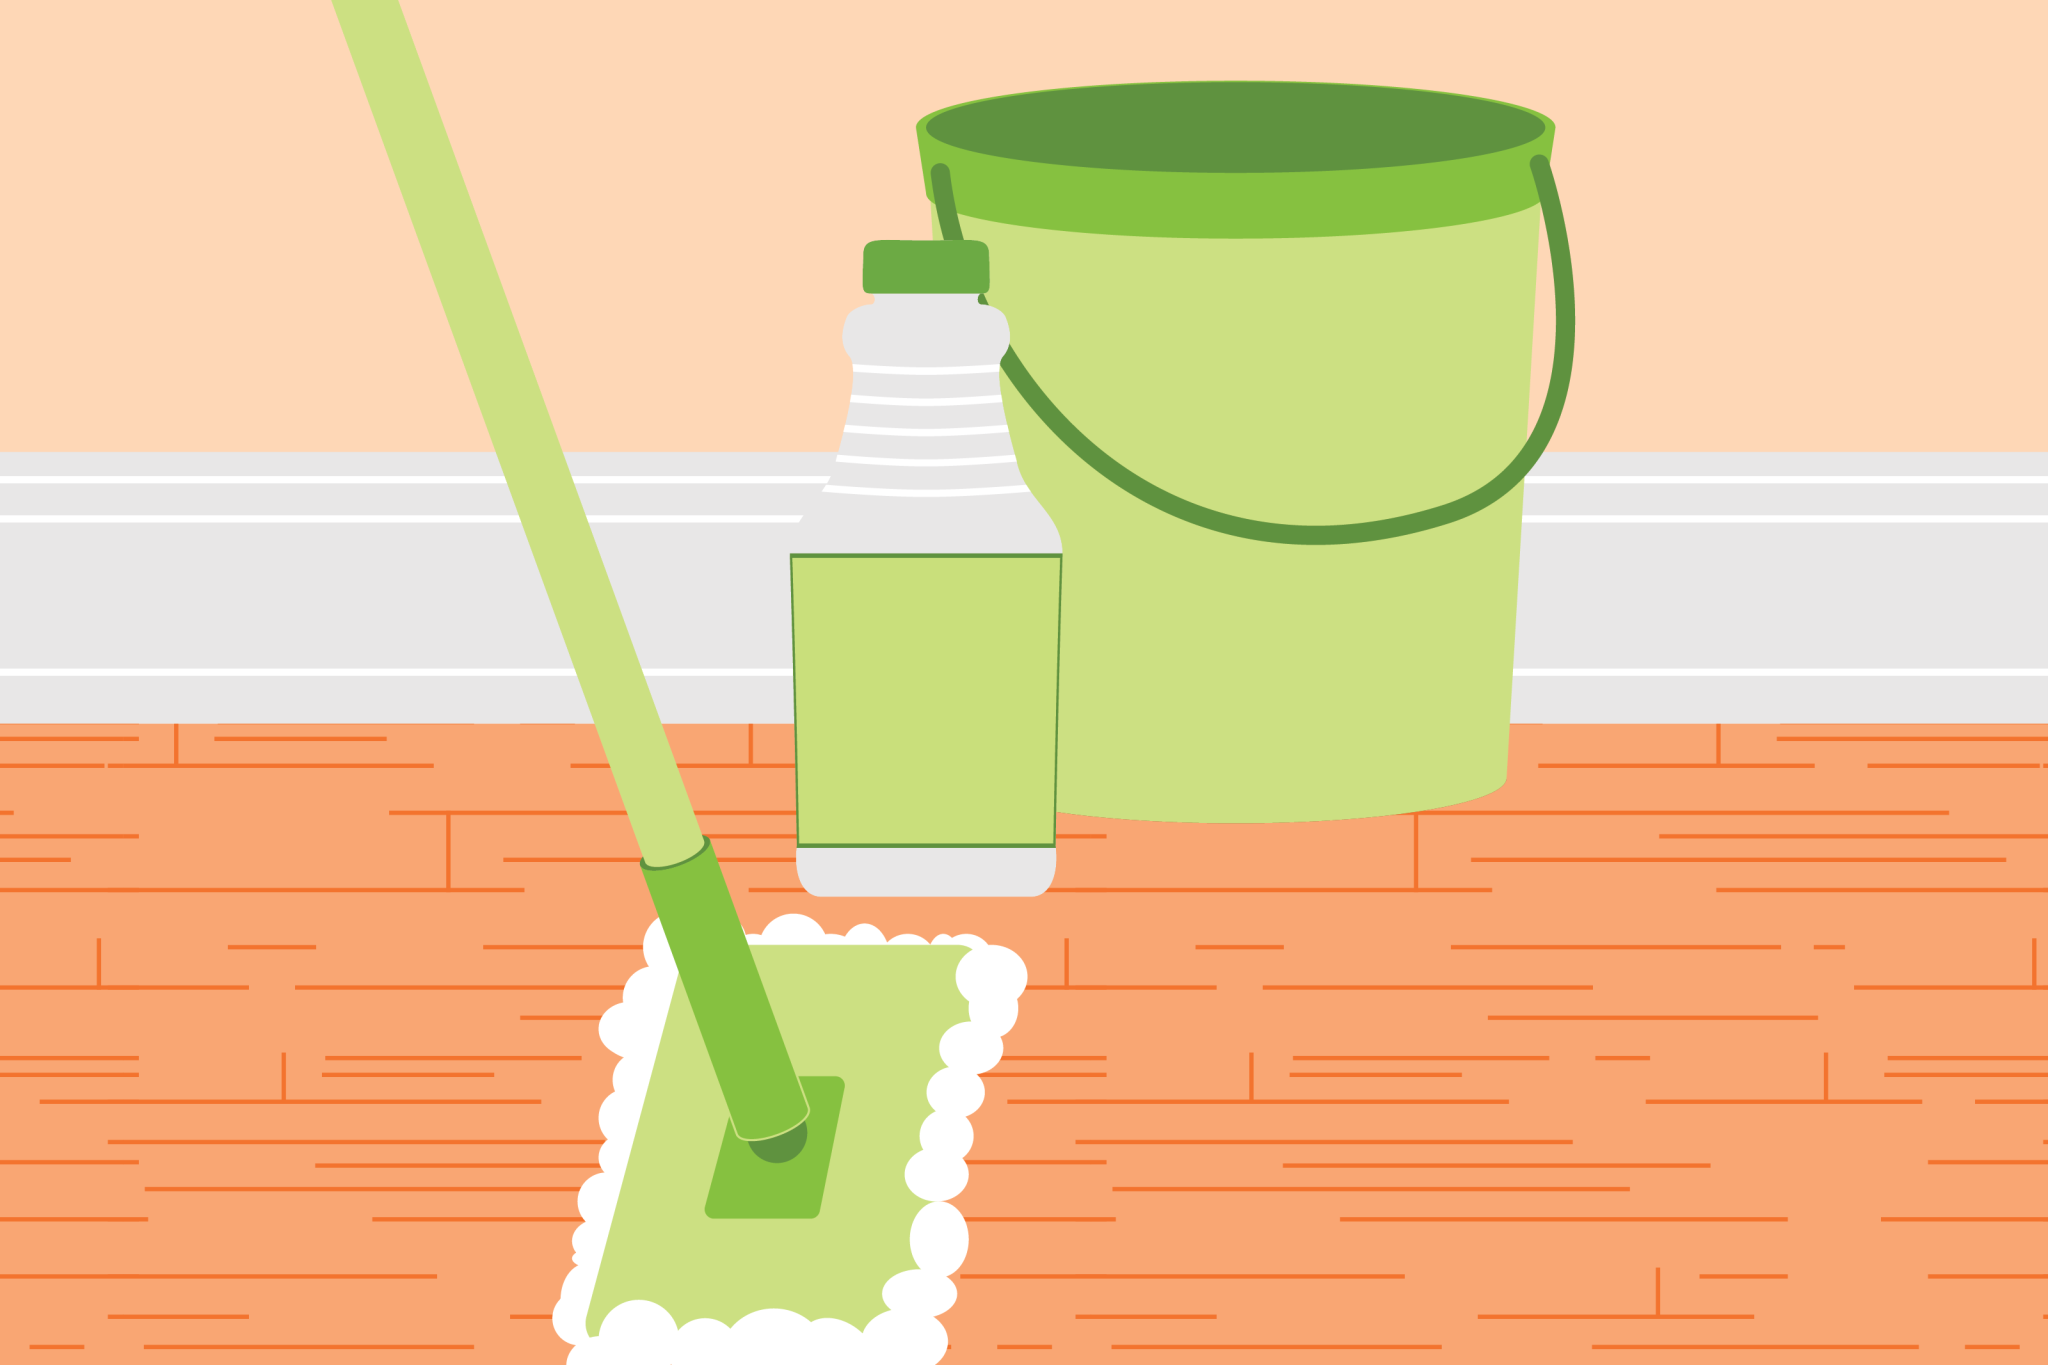 homemade products floor cleaner graphic of a green mop and bucket and green and white bottle of cleaner on a wood floor